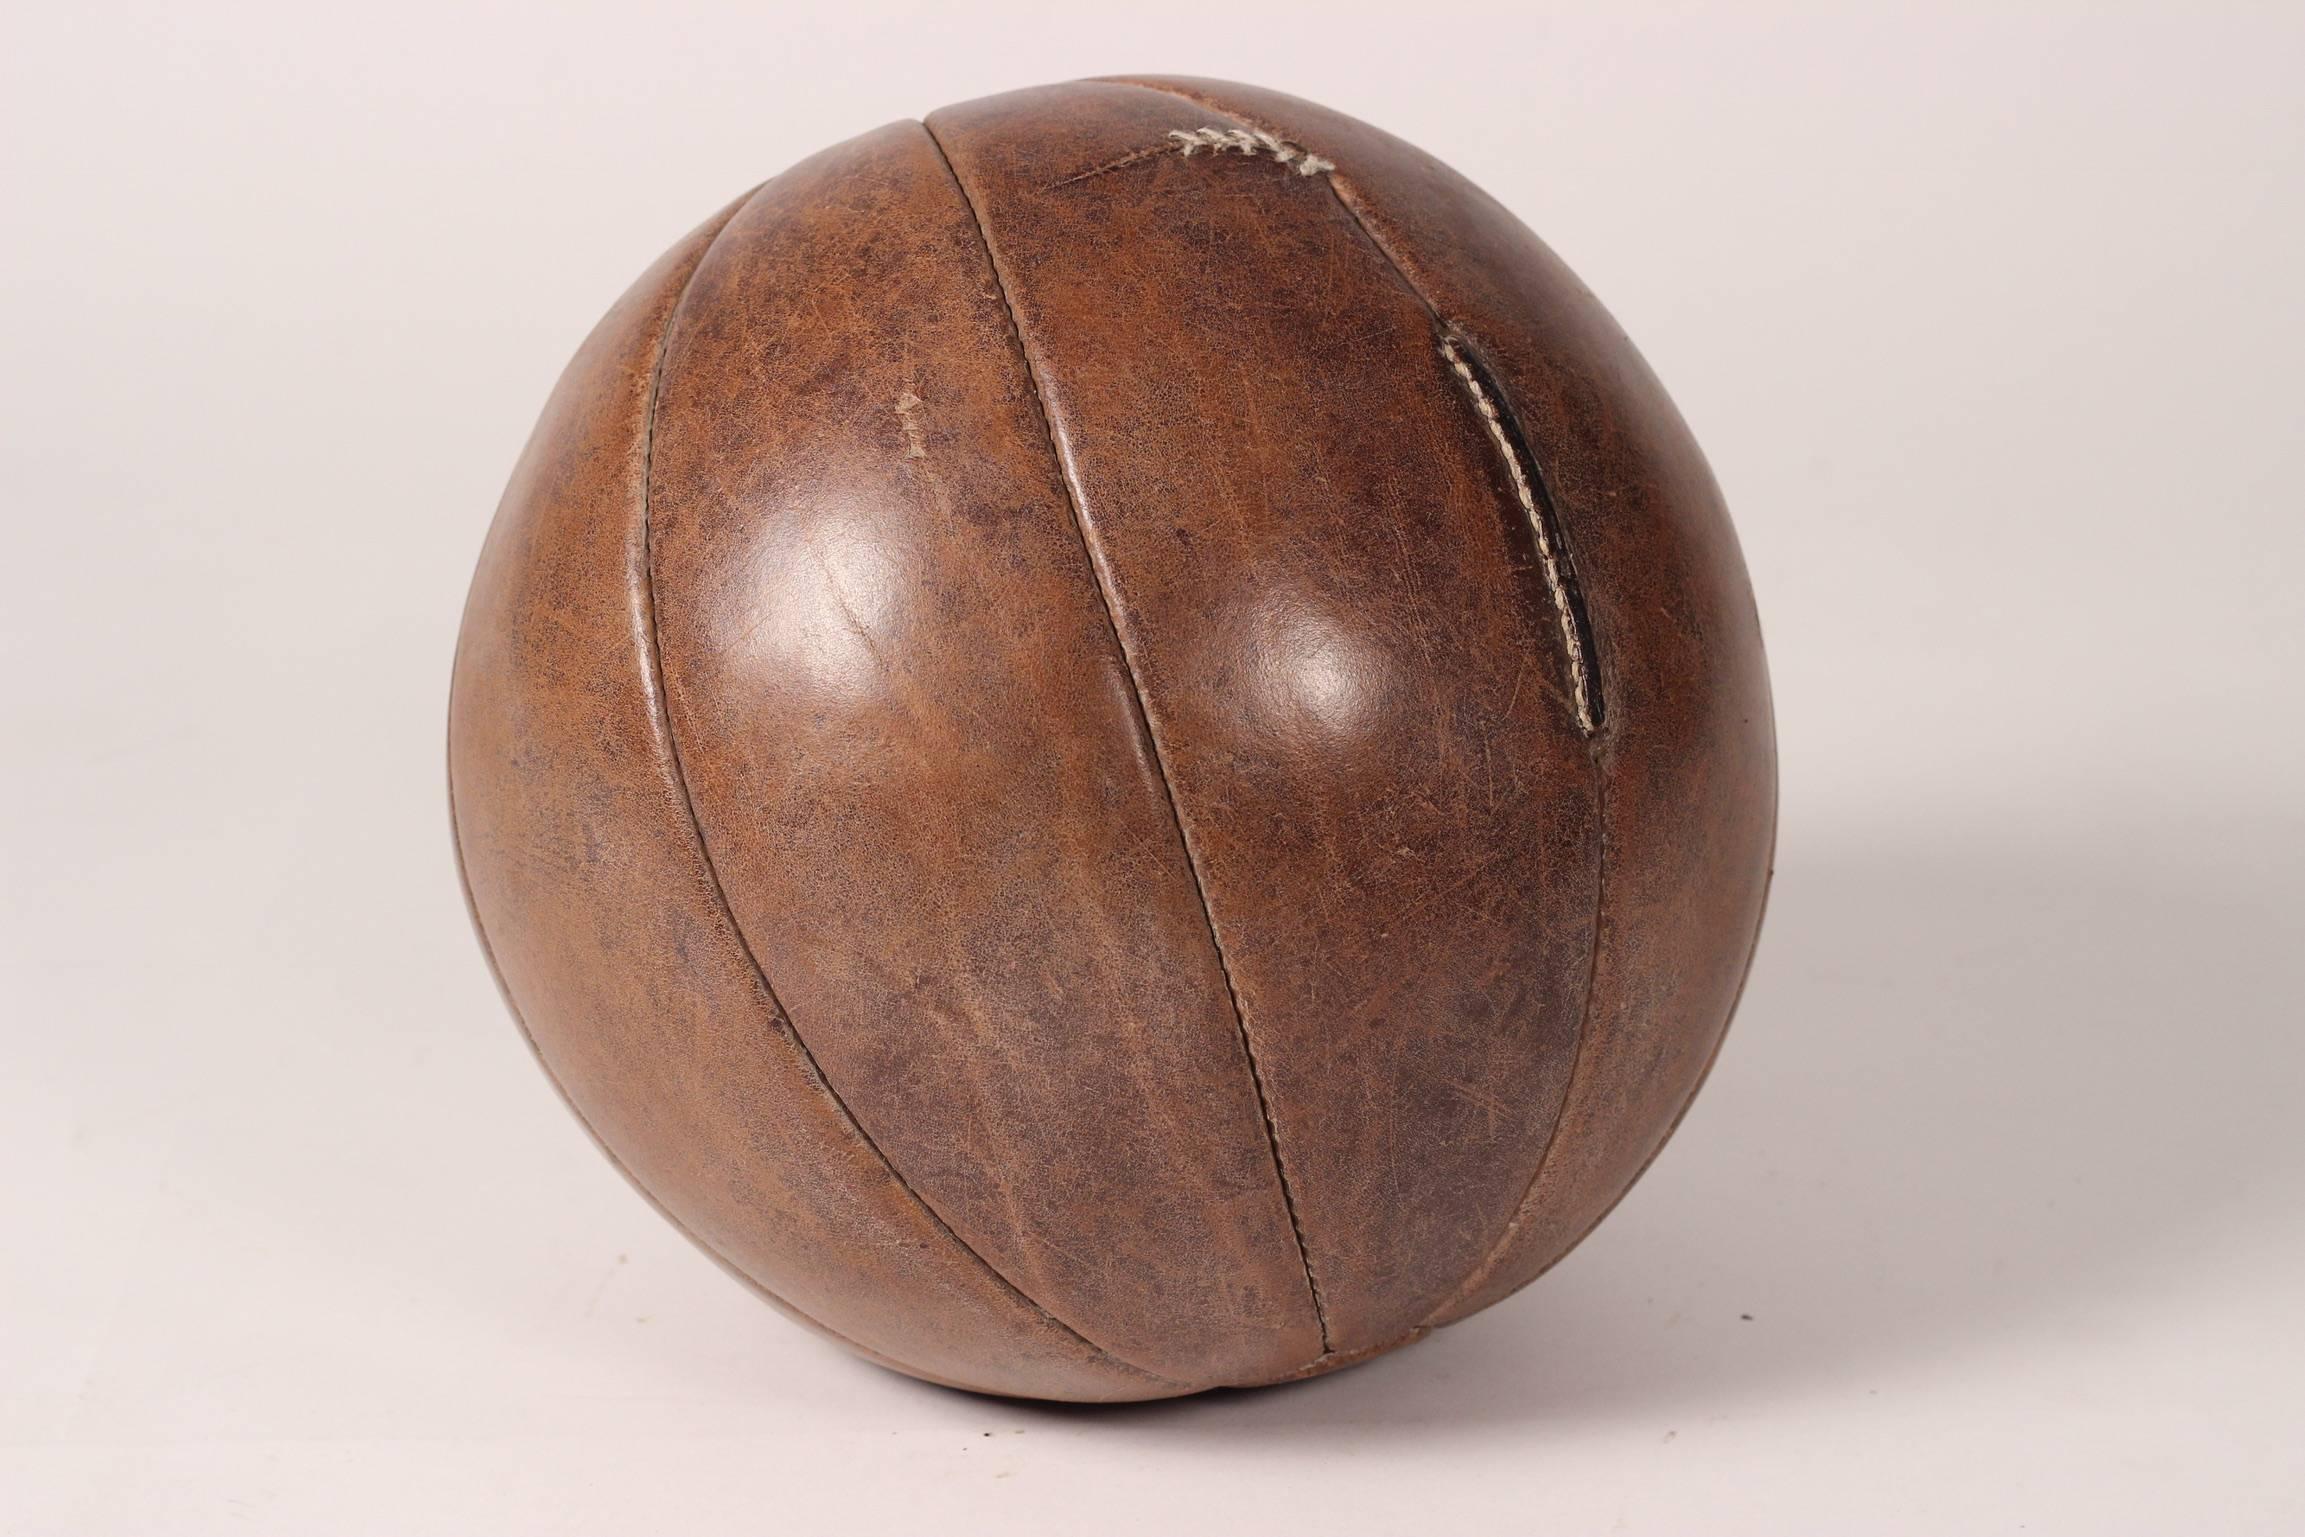 Vintage leather medicine ball, with minor stitched repair, which in our opinion adds to the character of the piece. This ball is structurally sound, with wonderful patina that only comes from genuine age and wear.